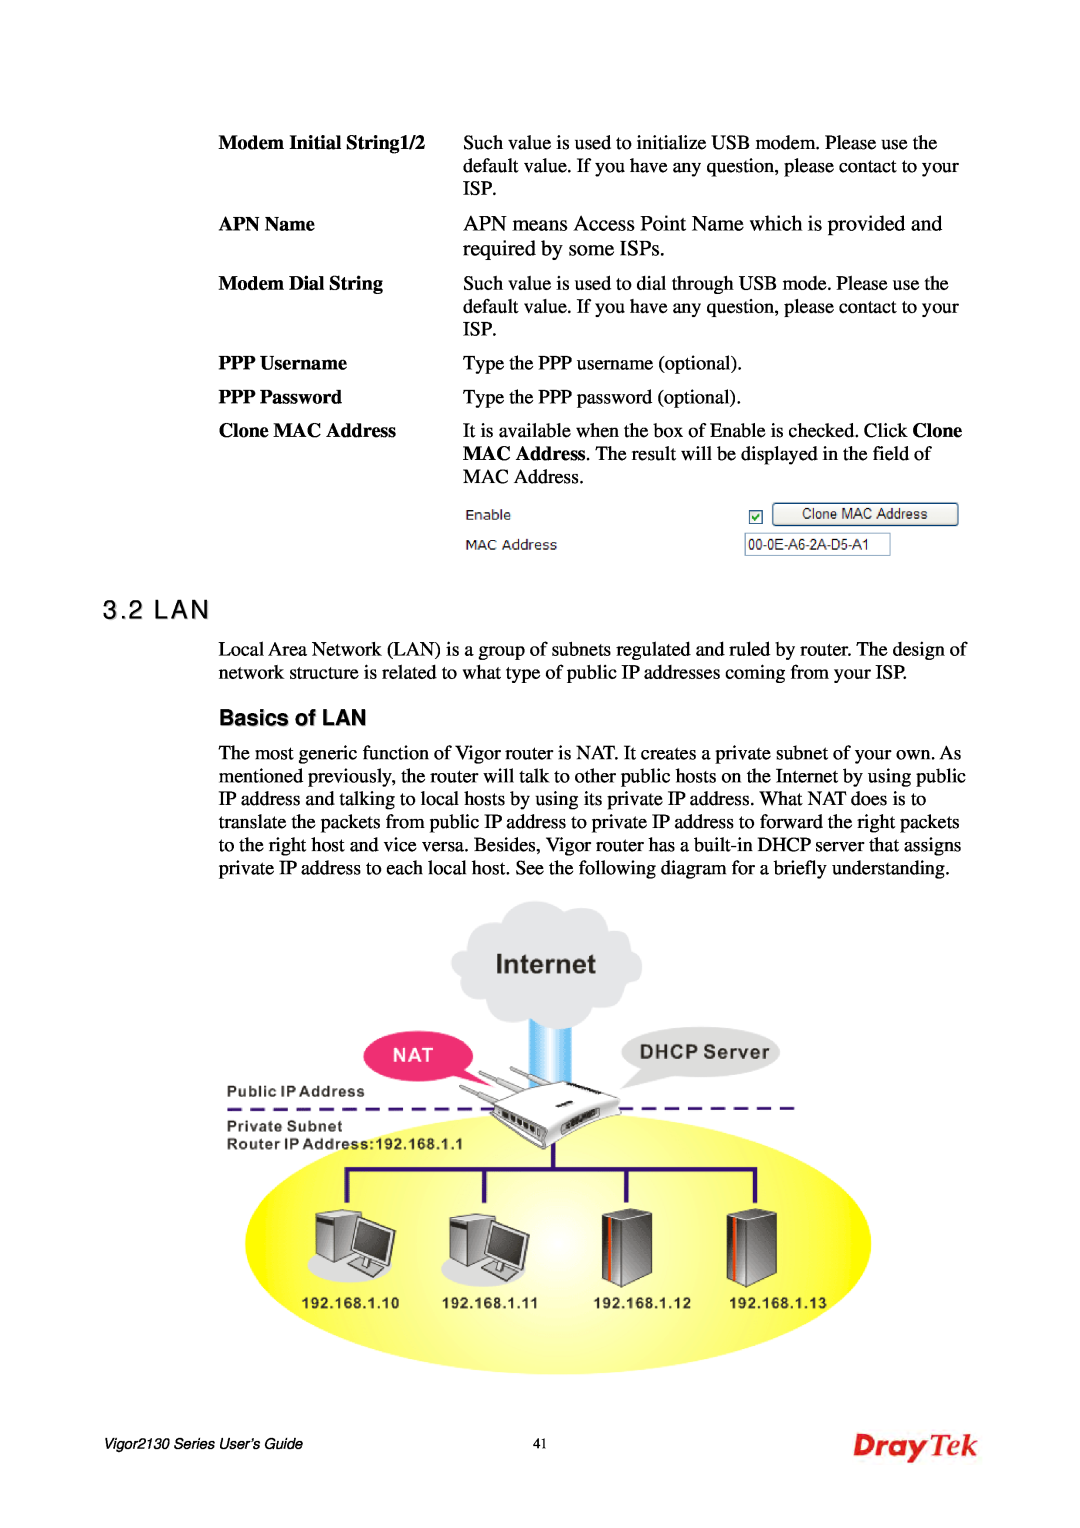 Draytek 2130 manual 3.2 LAN, Basics of LAN, APN means Access Point Name which is provided and, required by some ISPs 